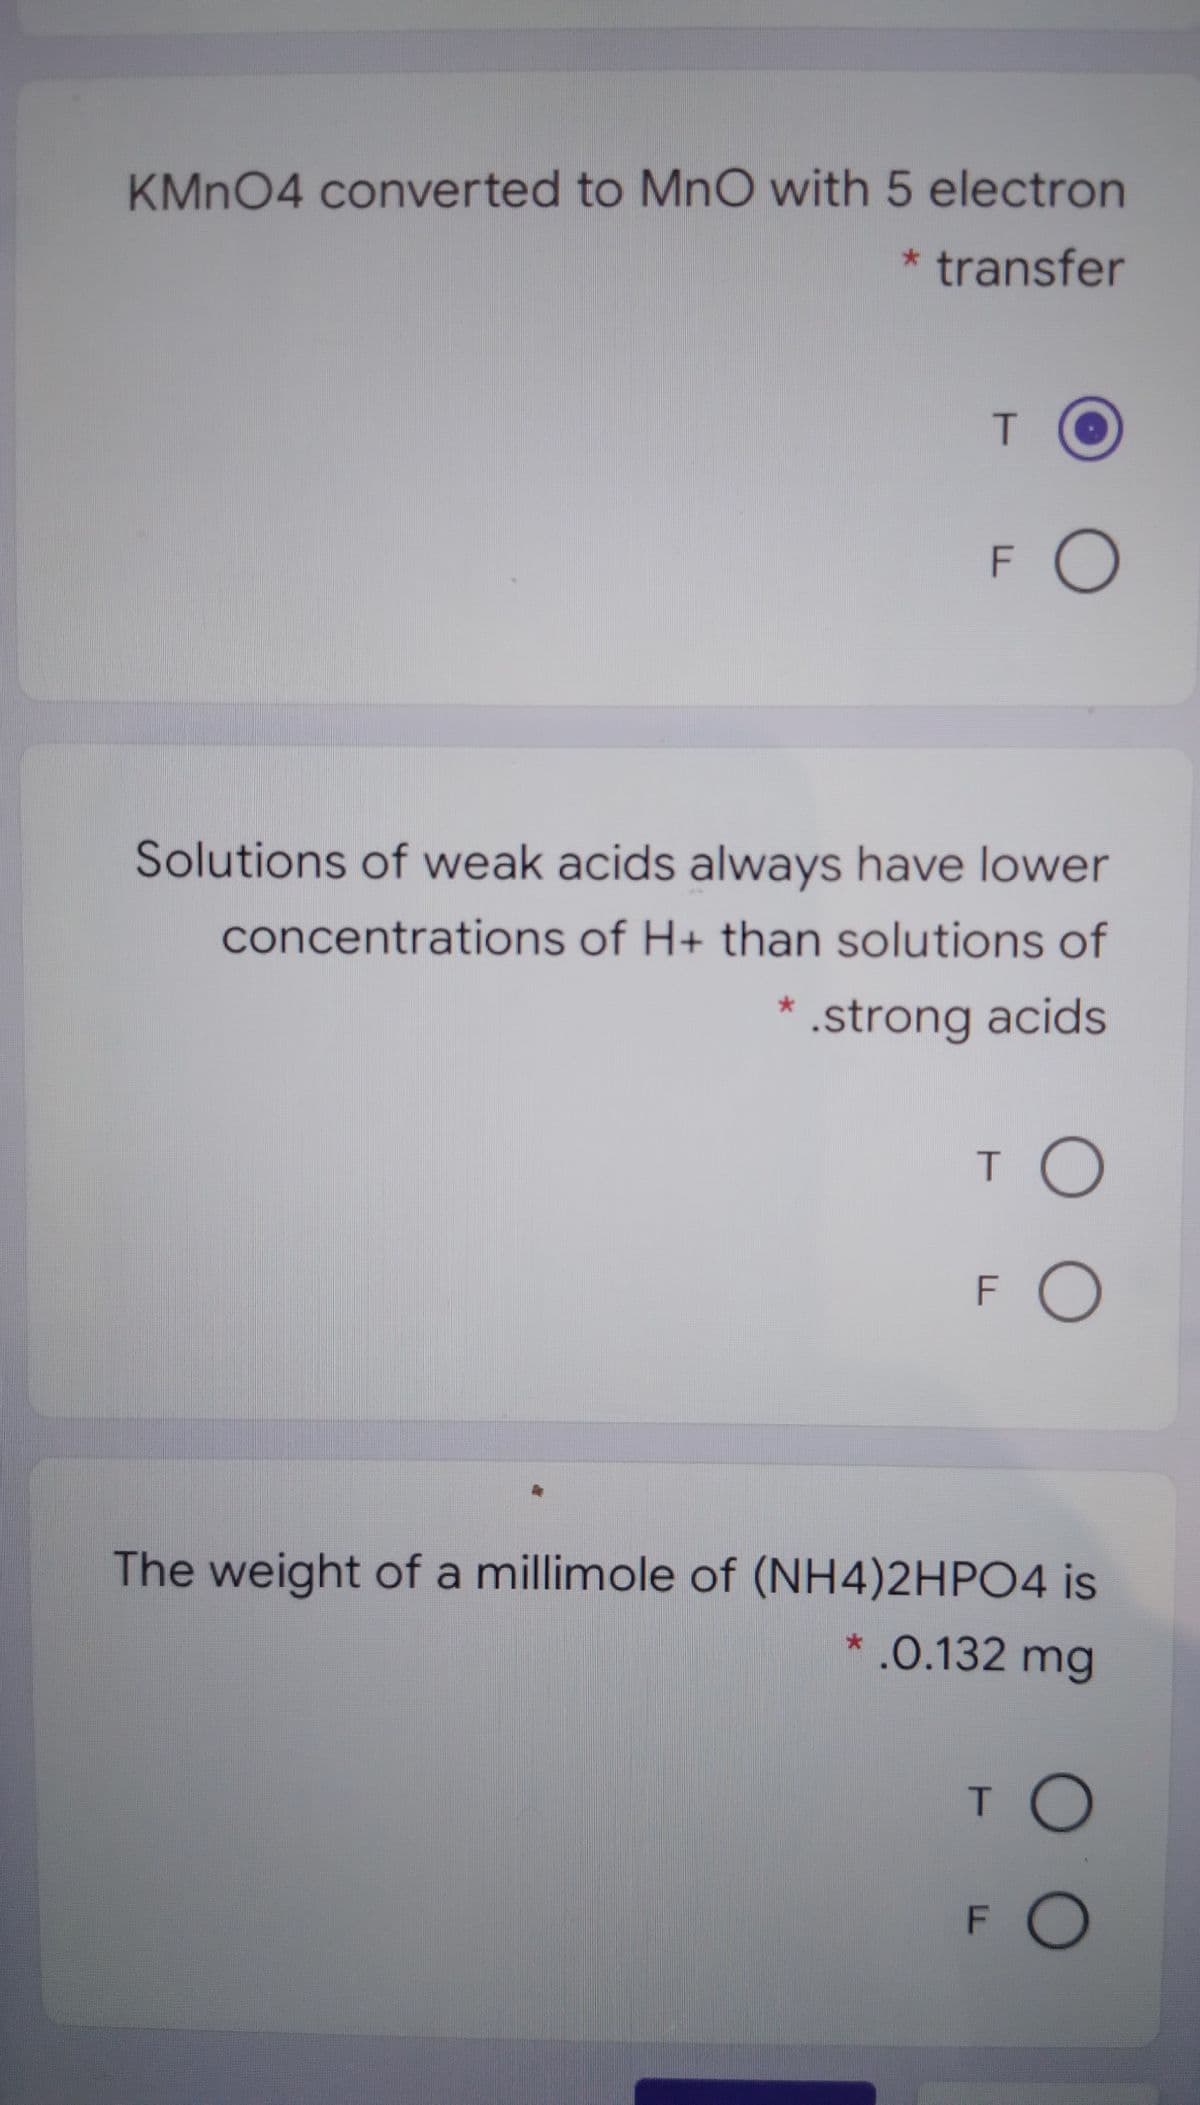 KMN04 converted to MnO with 5 electron
* transfer
F O
Solutions of weak acids always have lower
concentrations of H+ than solutions of
* .strong acids
T O
FO
The weight of a millimole of (NH4)2HP04 is
*.0.132 mg
FO
